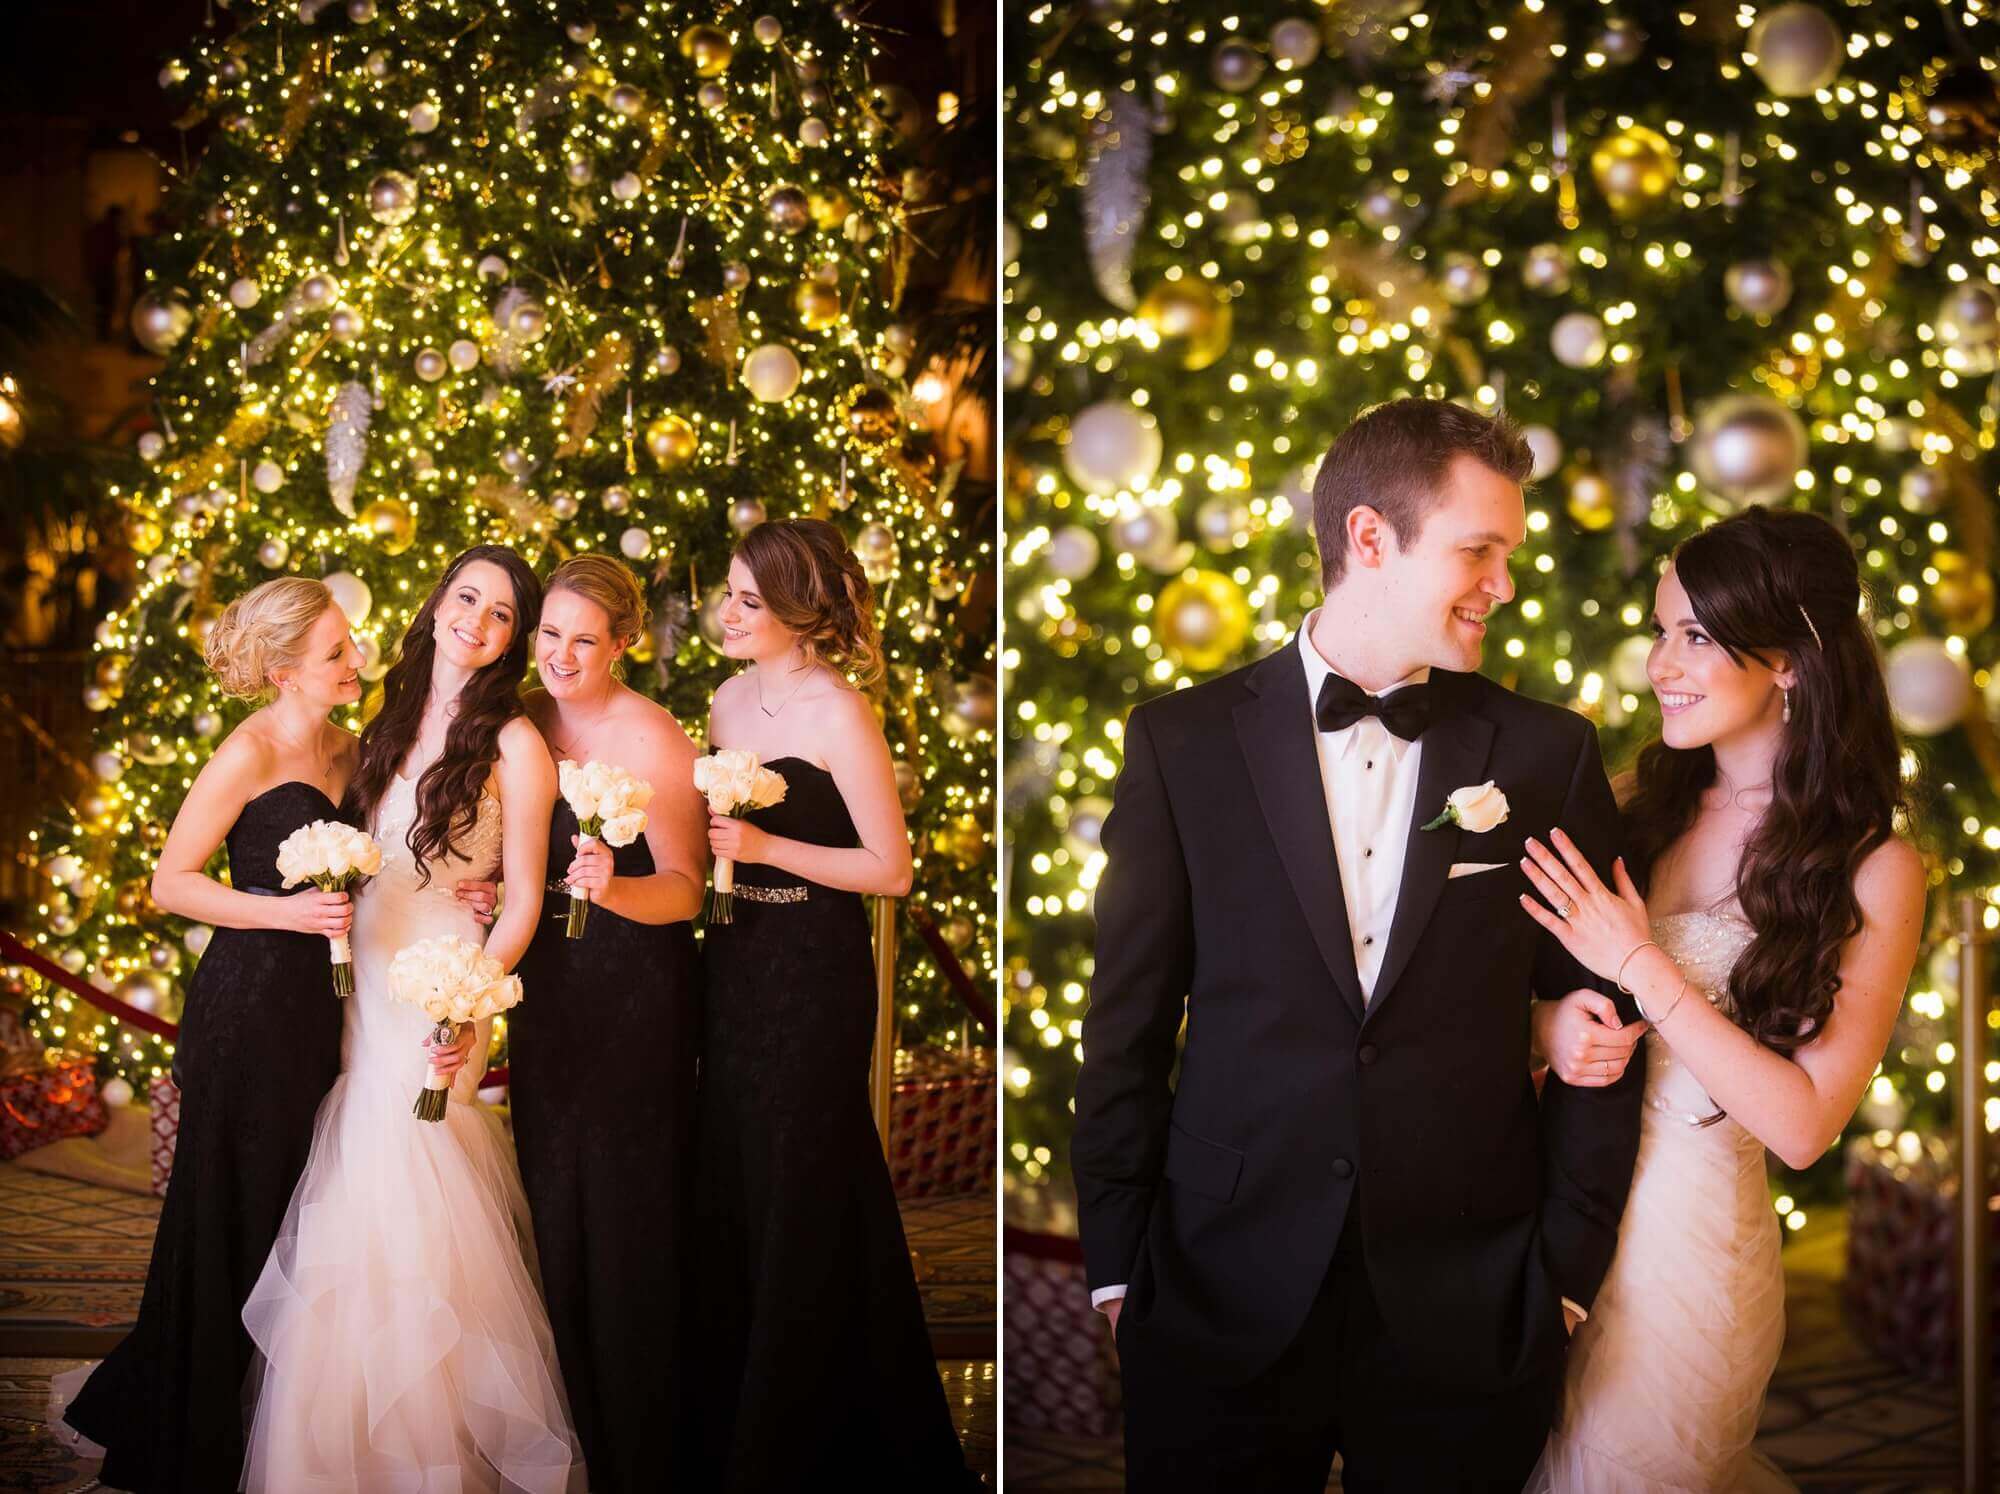 Portrait of the bride holding onto her grooms arm, illuminated by the lights on the Christmas tree at Fairmont Royal York in Toronto